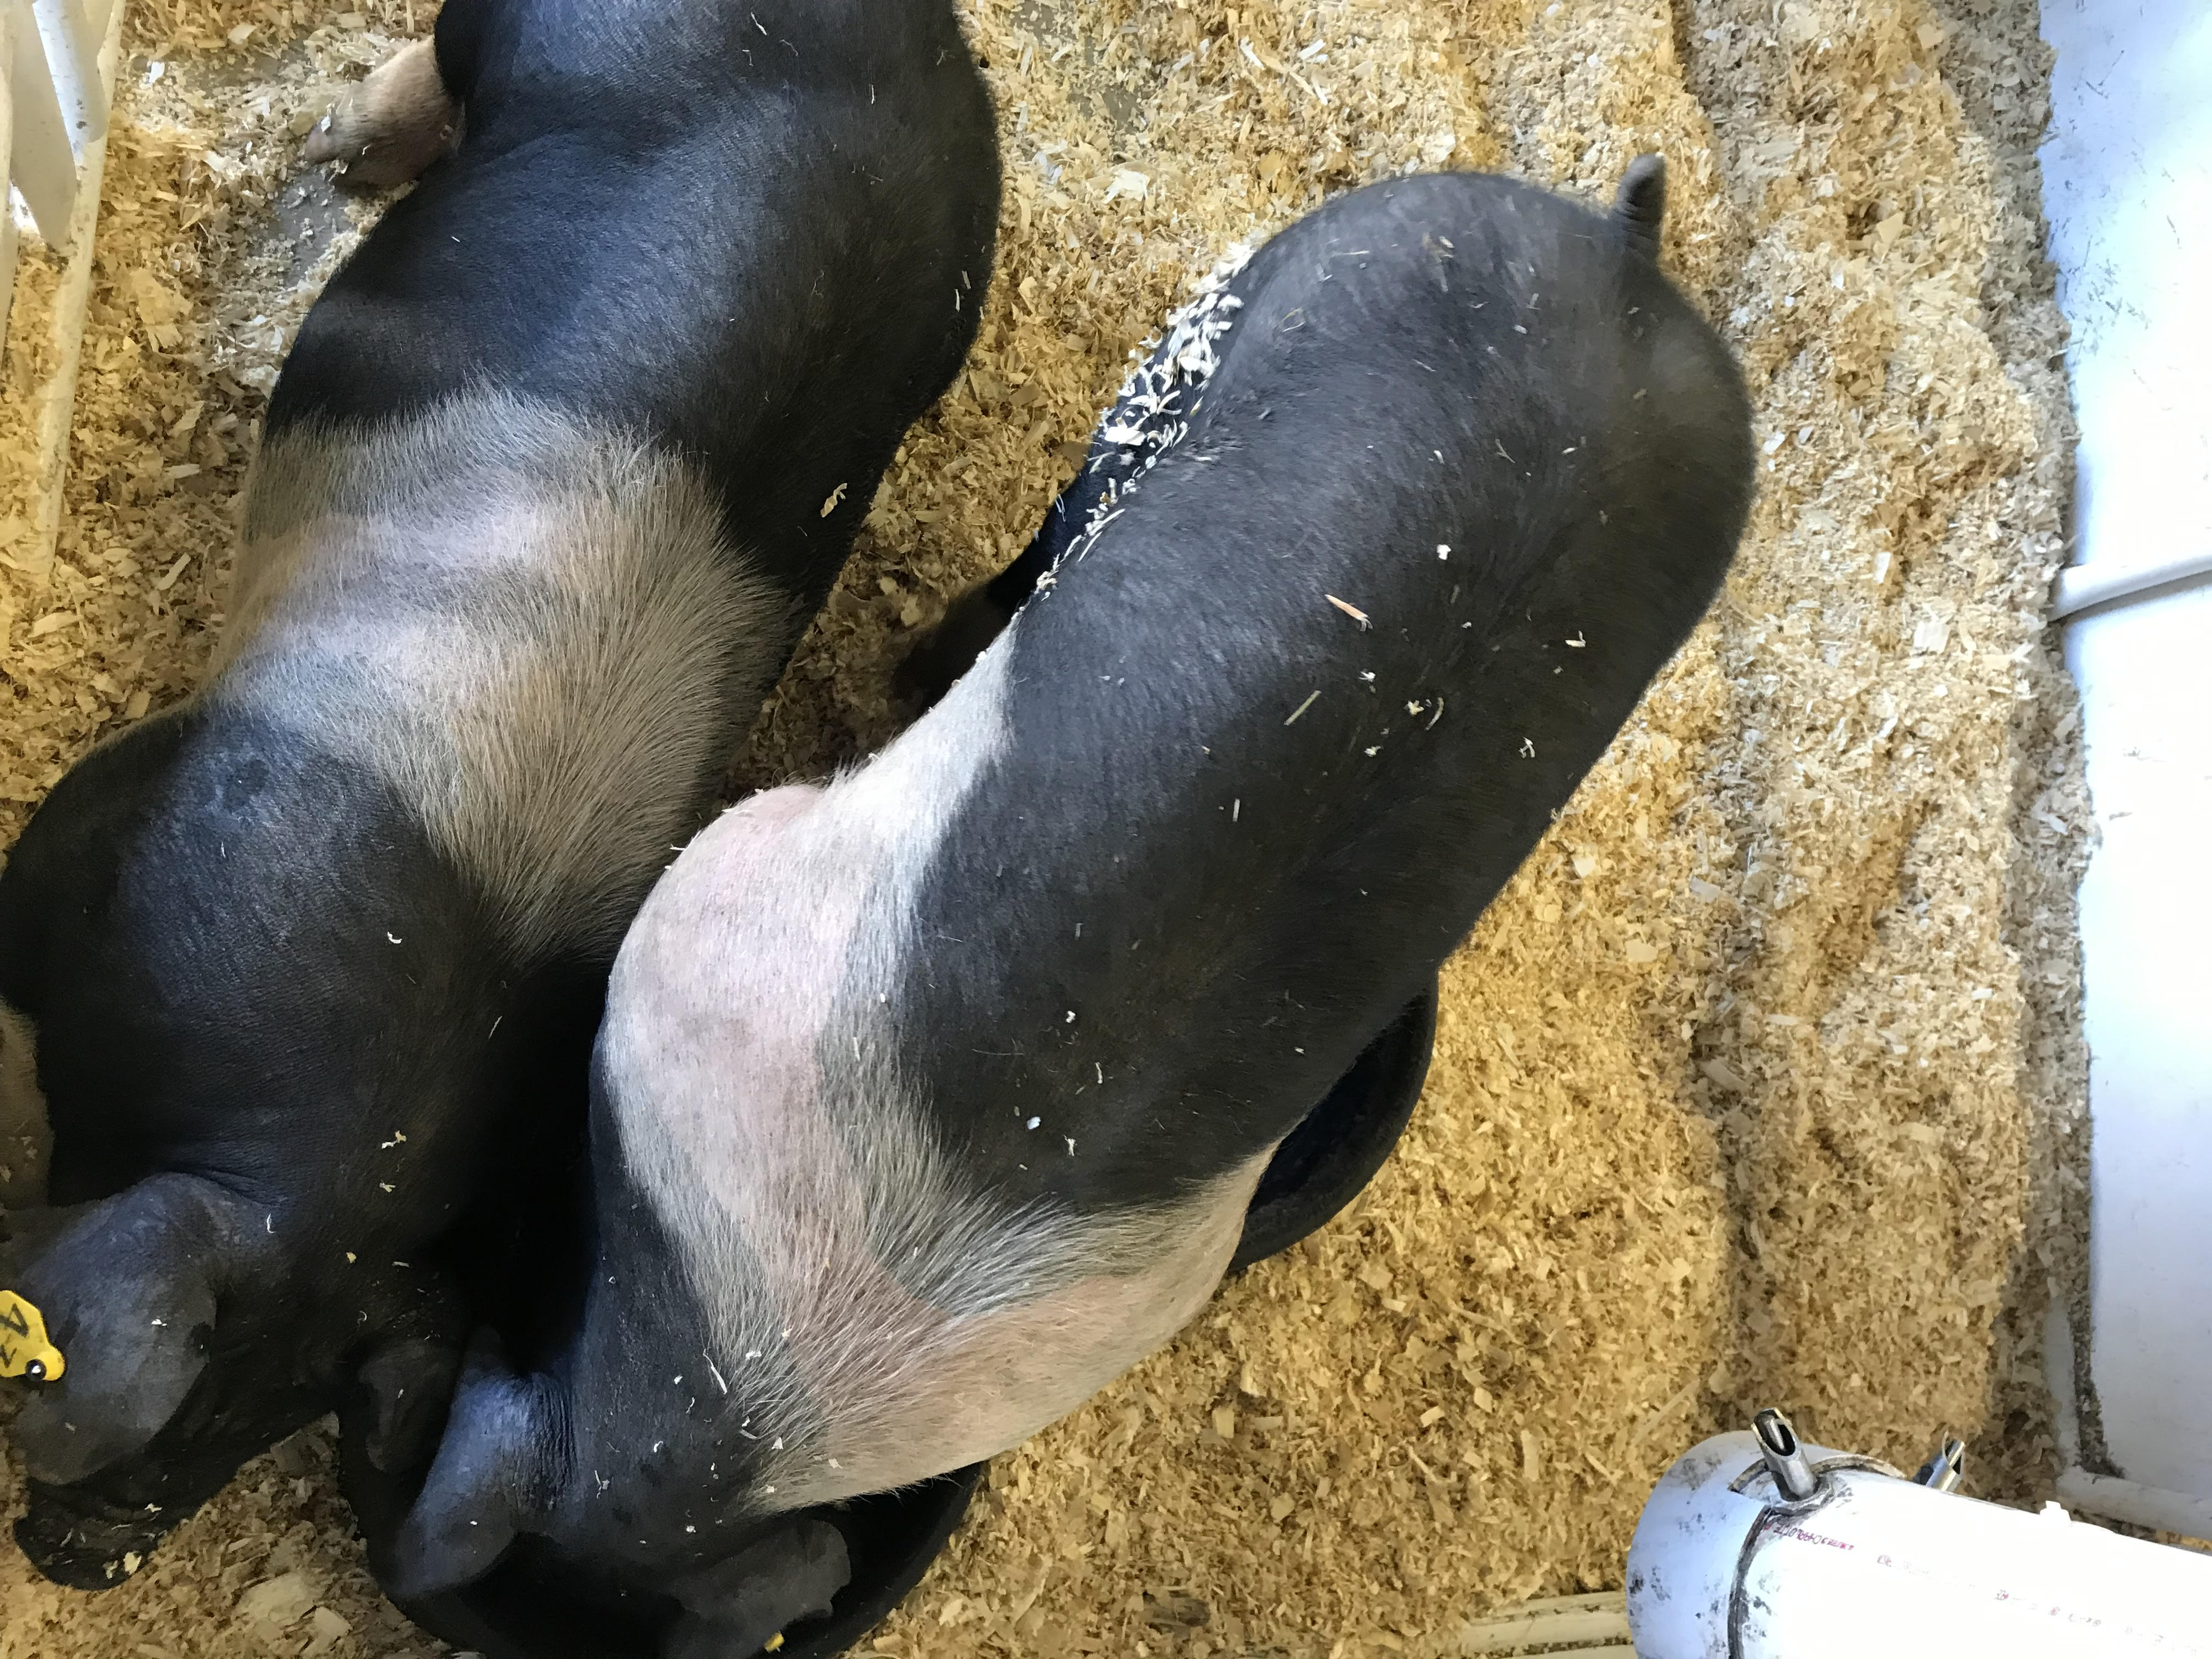 Mid-morning Ag News, March 24, 2021: Quarterly Hogs and Pigs report to be released Thursday